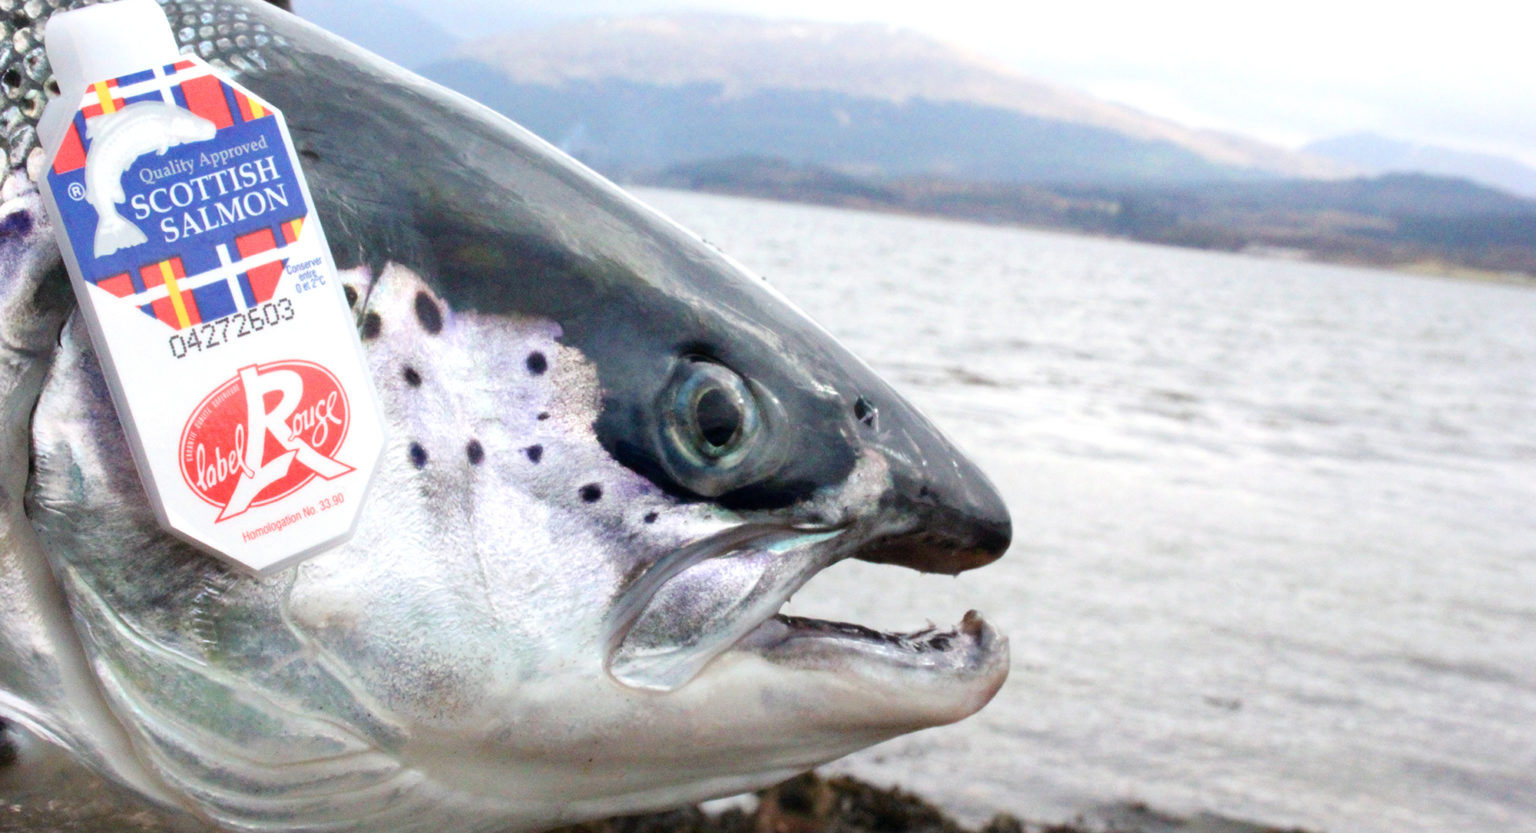 NGO contacts UK gov’t in view of legal challenge over aquaculture regulation